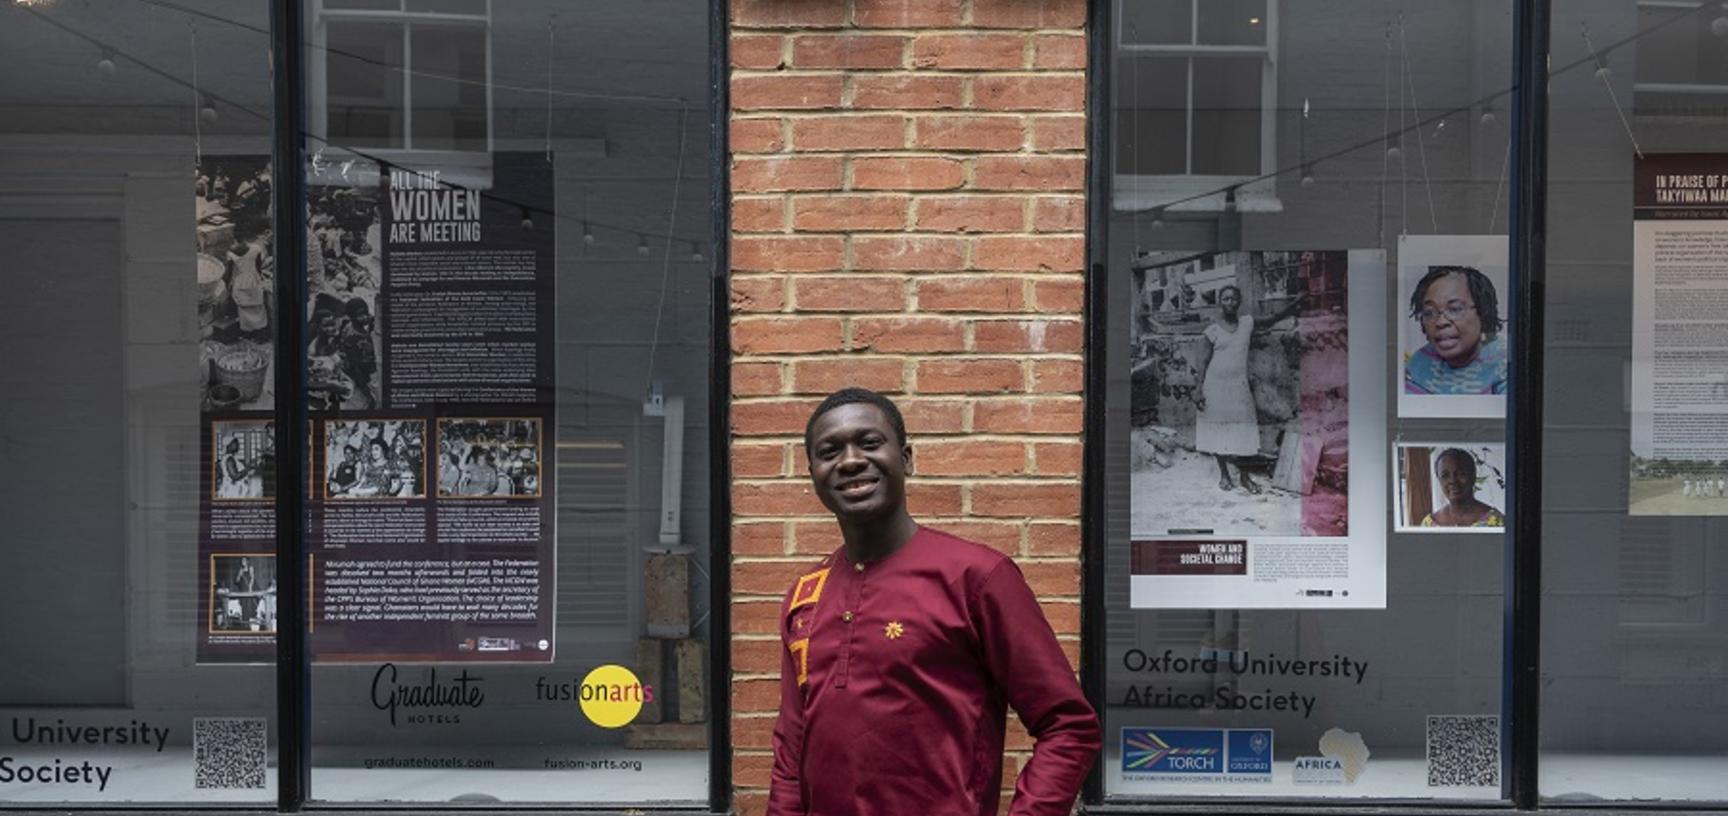 man in red shirt smiling in front of window display